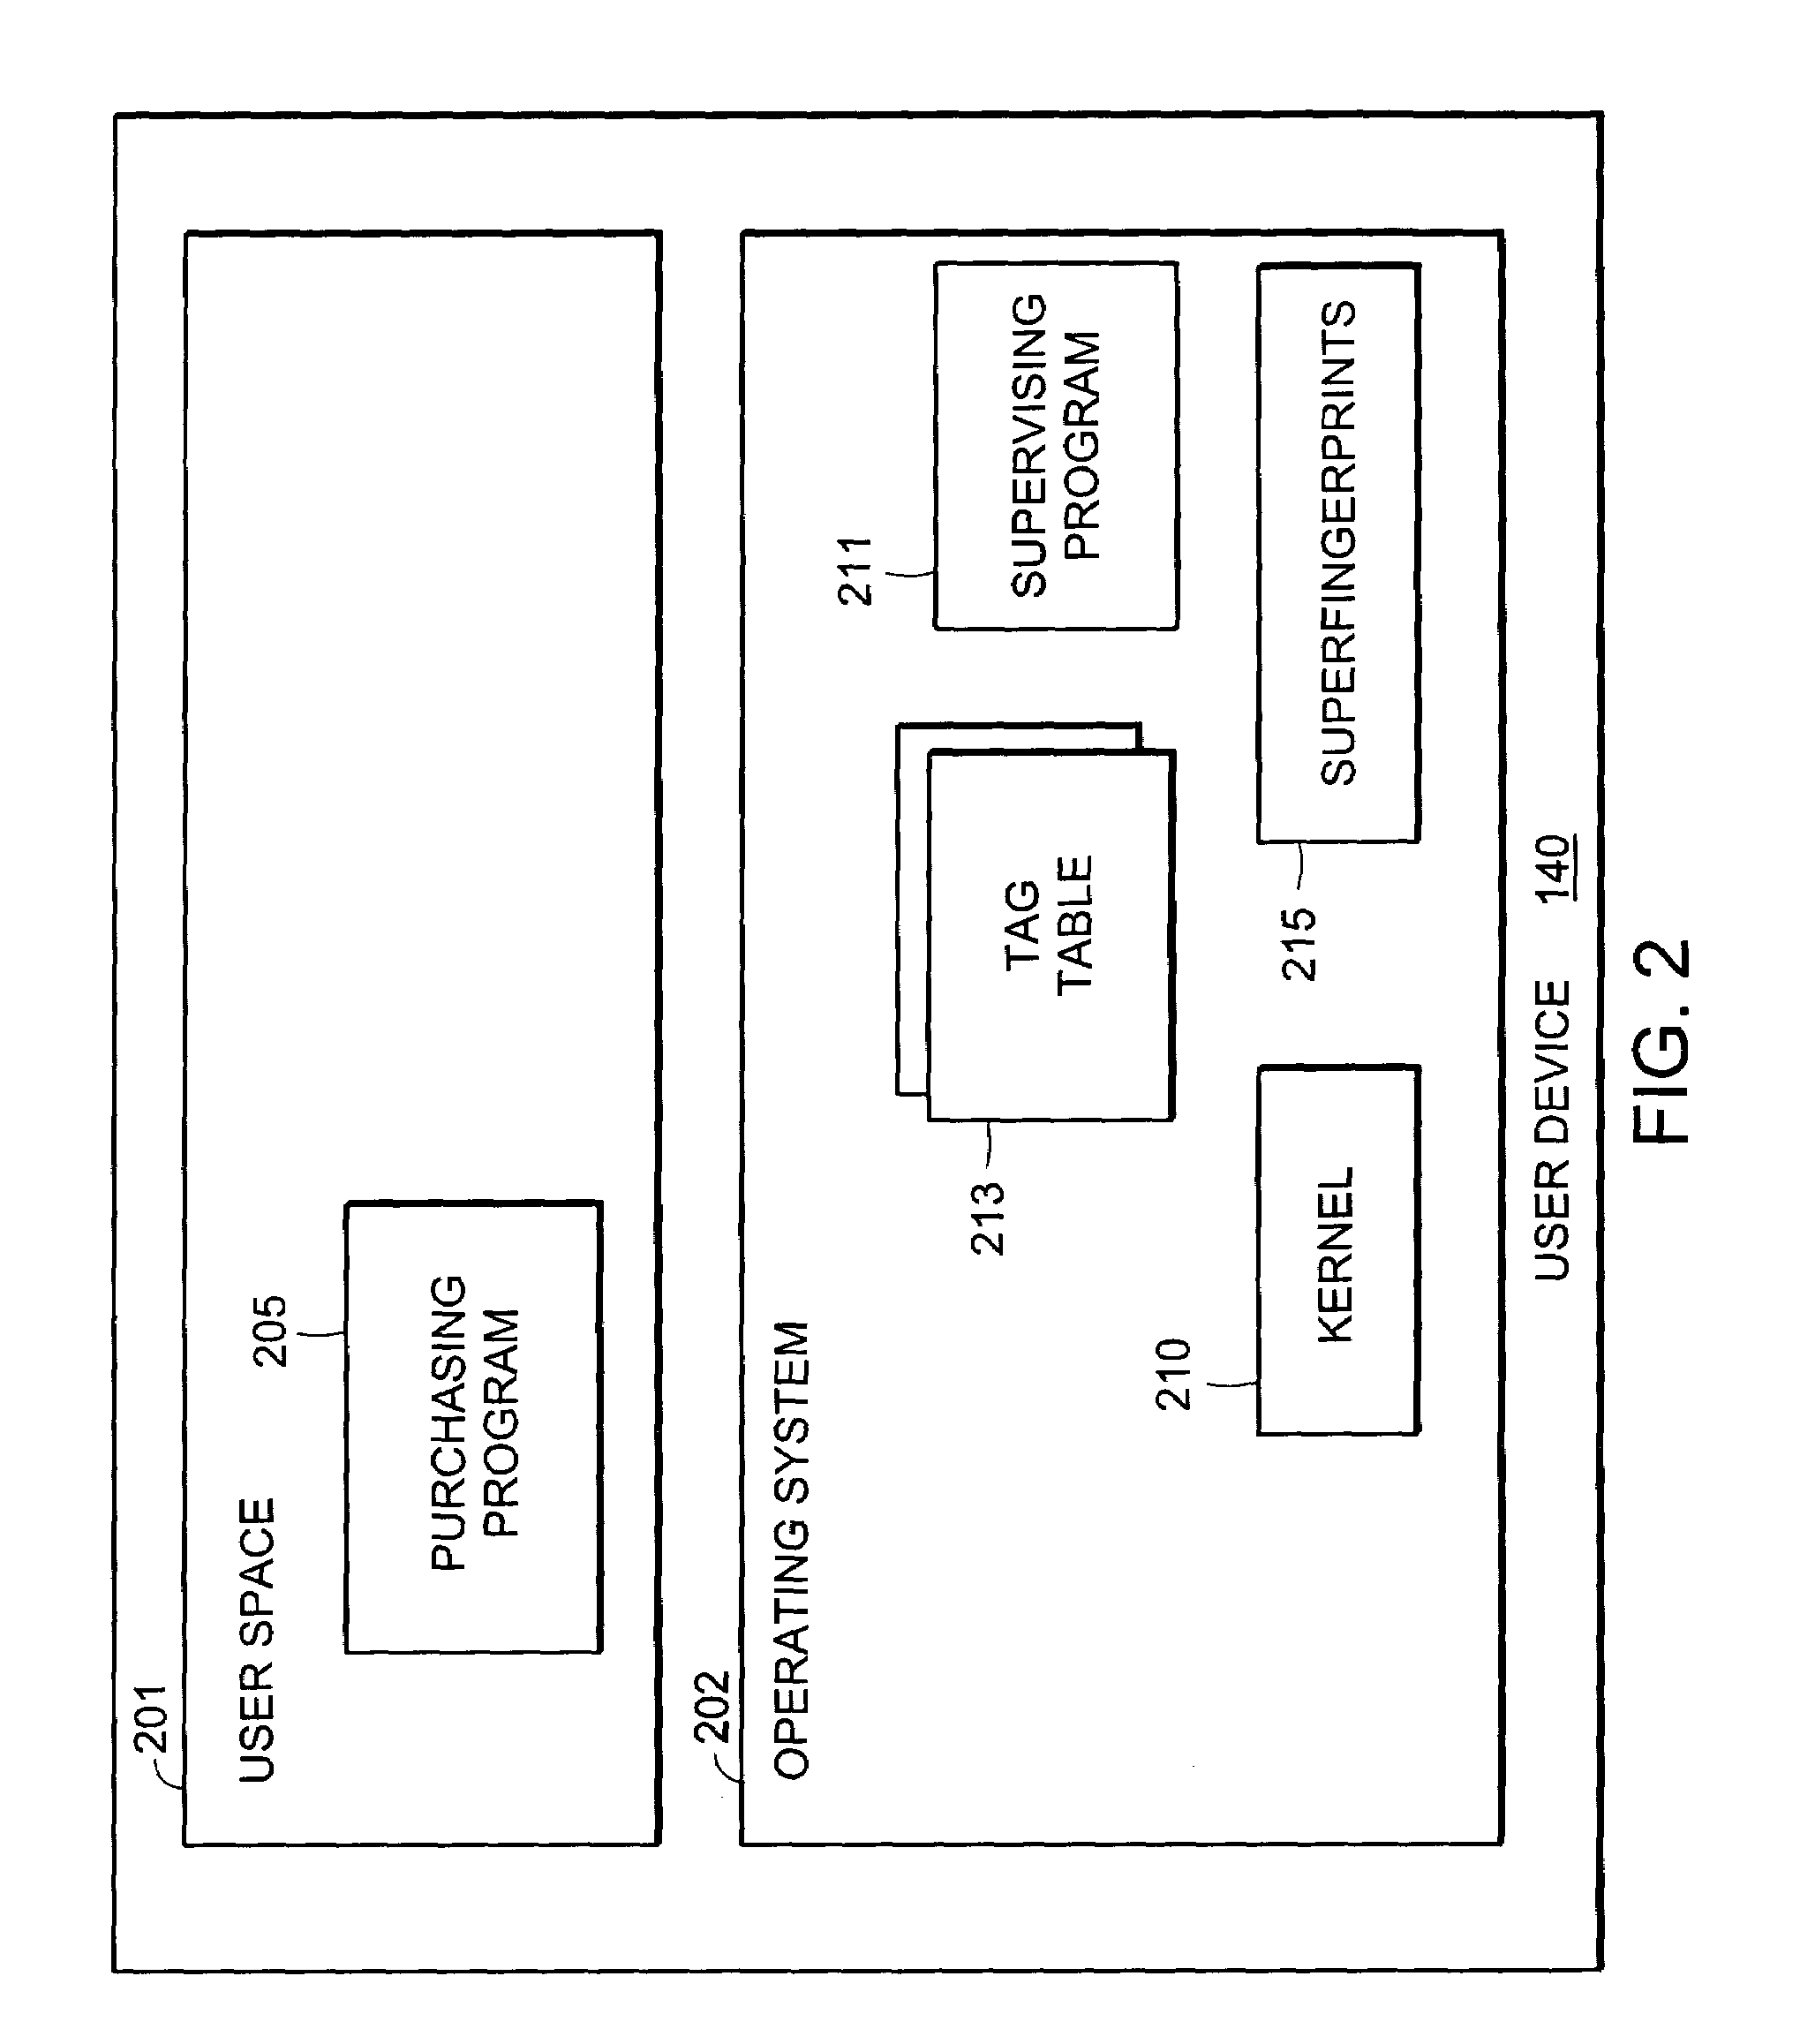 Method and apparatus for protecting information and privacy